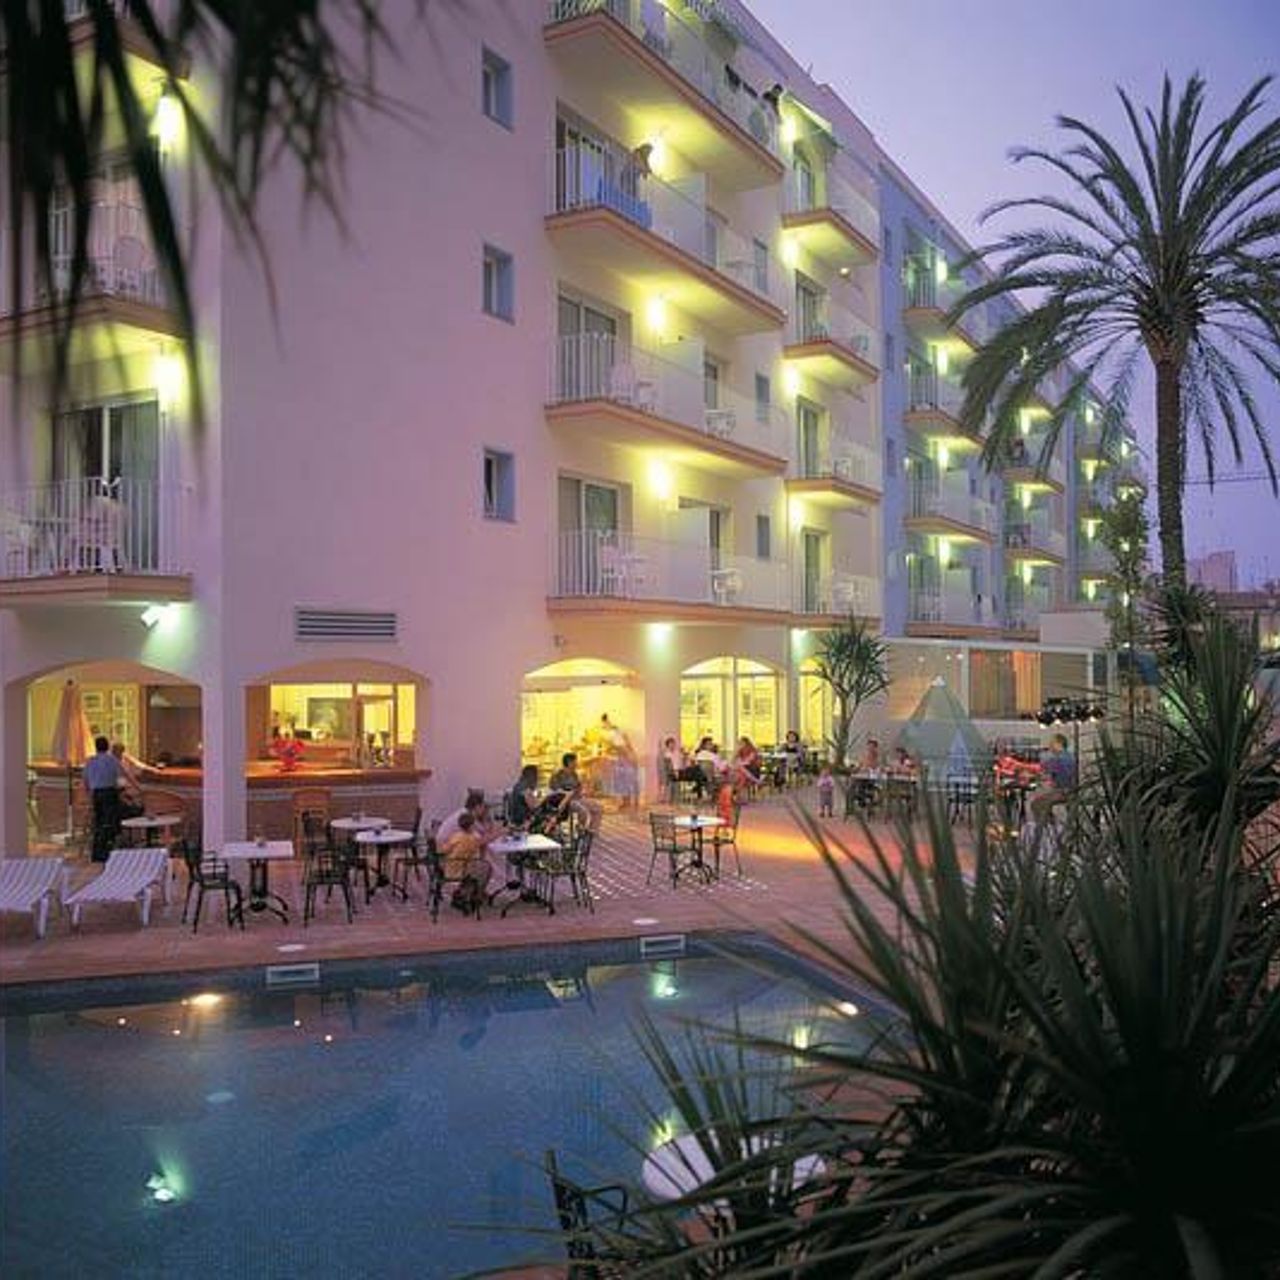 Hotel Les Palmeres - Calella - Great prices at HOTEL INFO